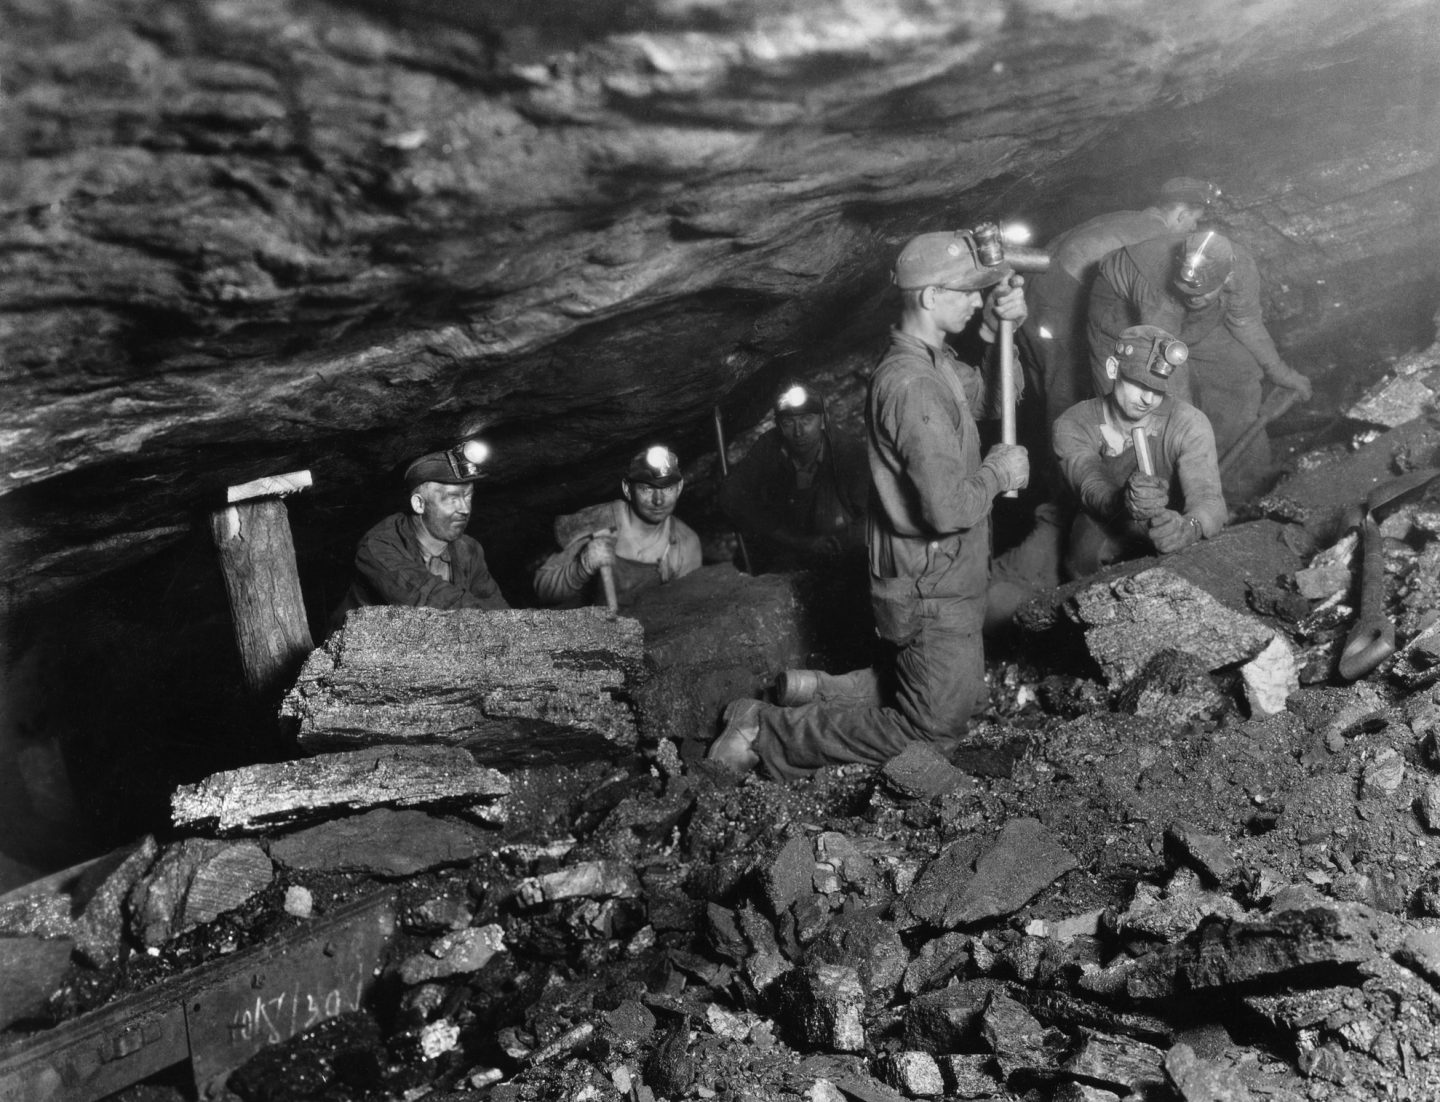 Coal mining was hard and tough work. Its effects still traumatise populations for which the digging stopped generations ago.